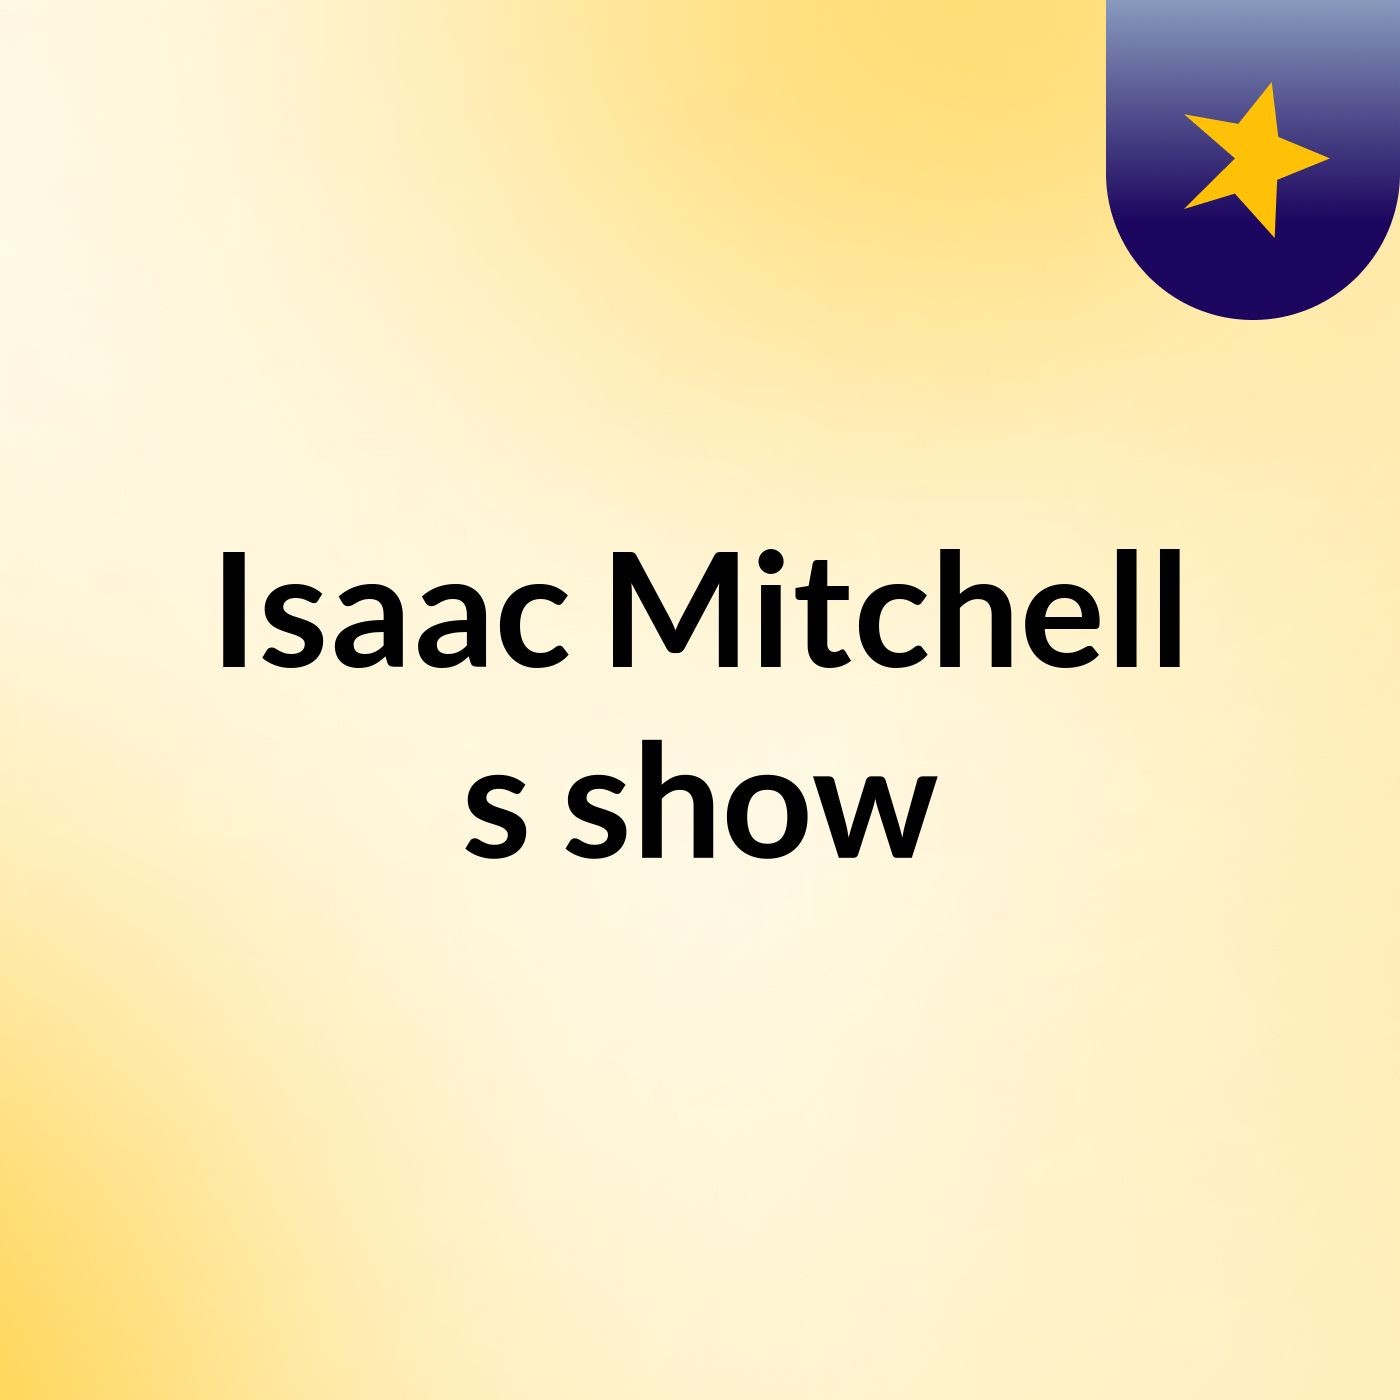 Isaac Mitchell's show